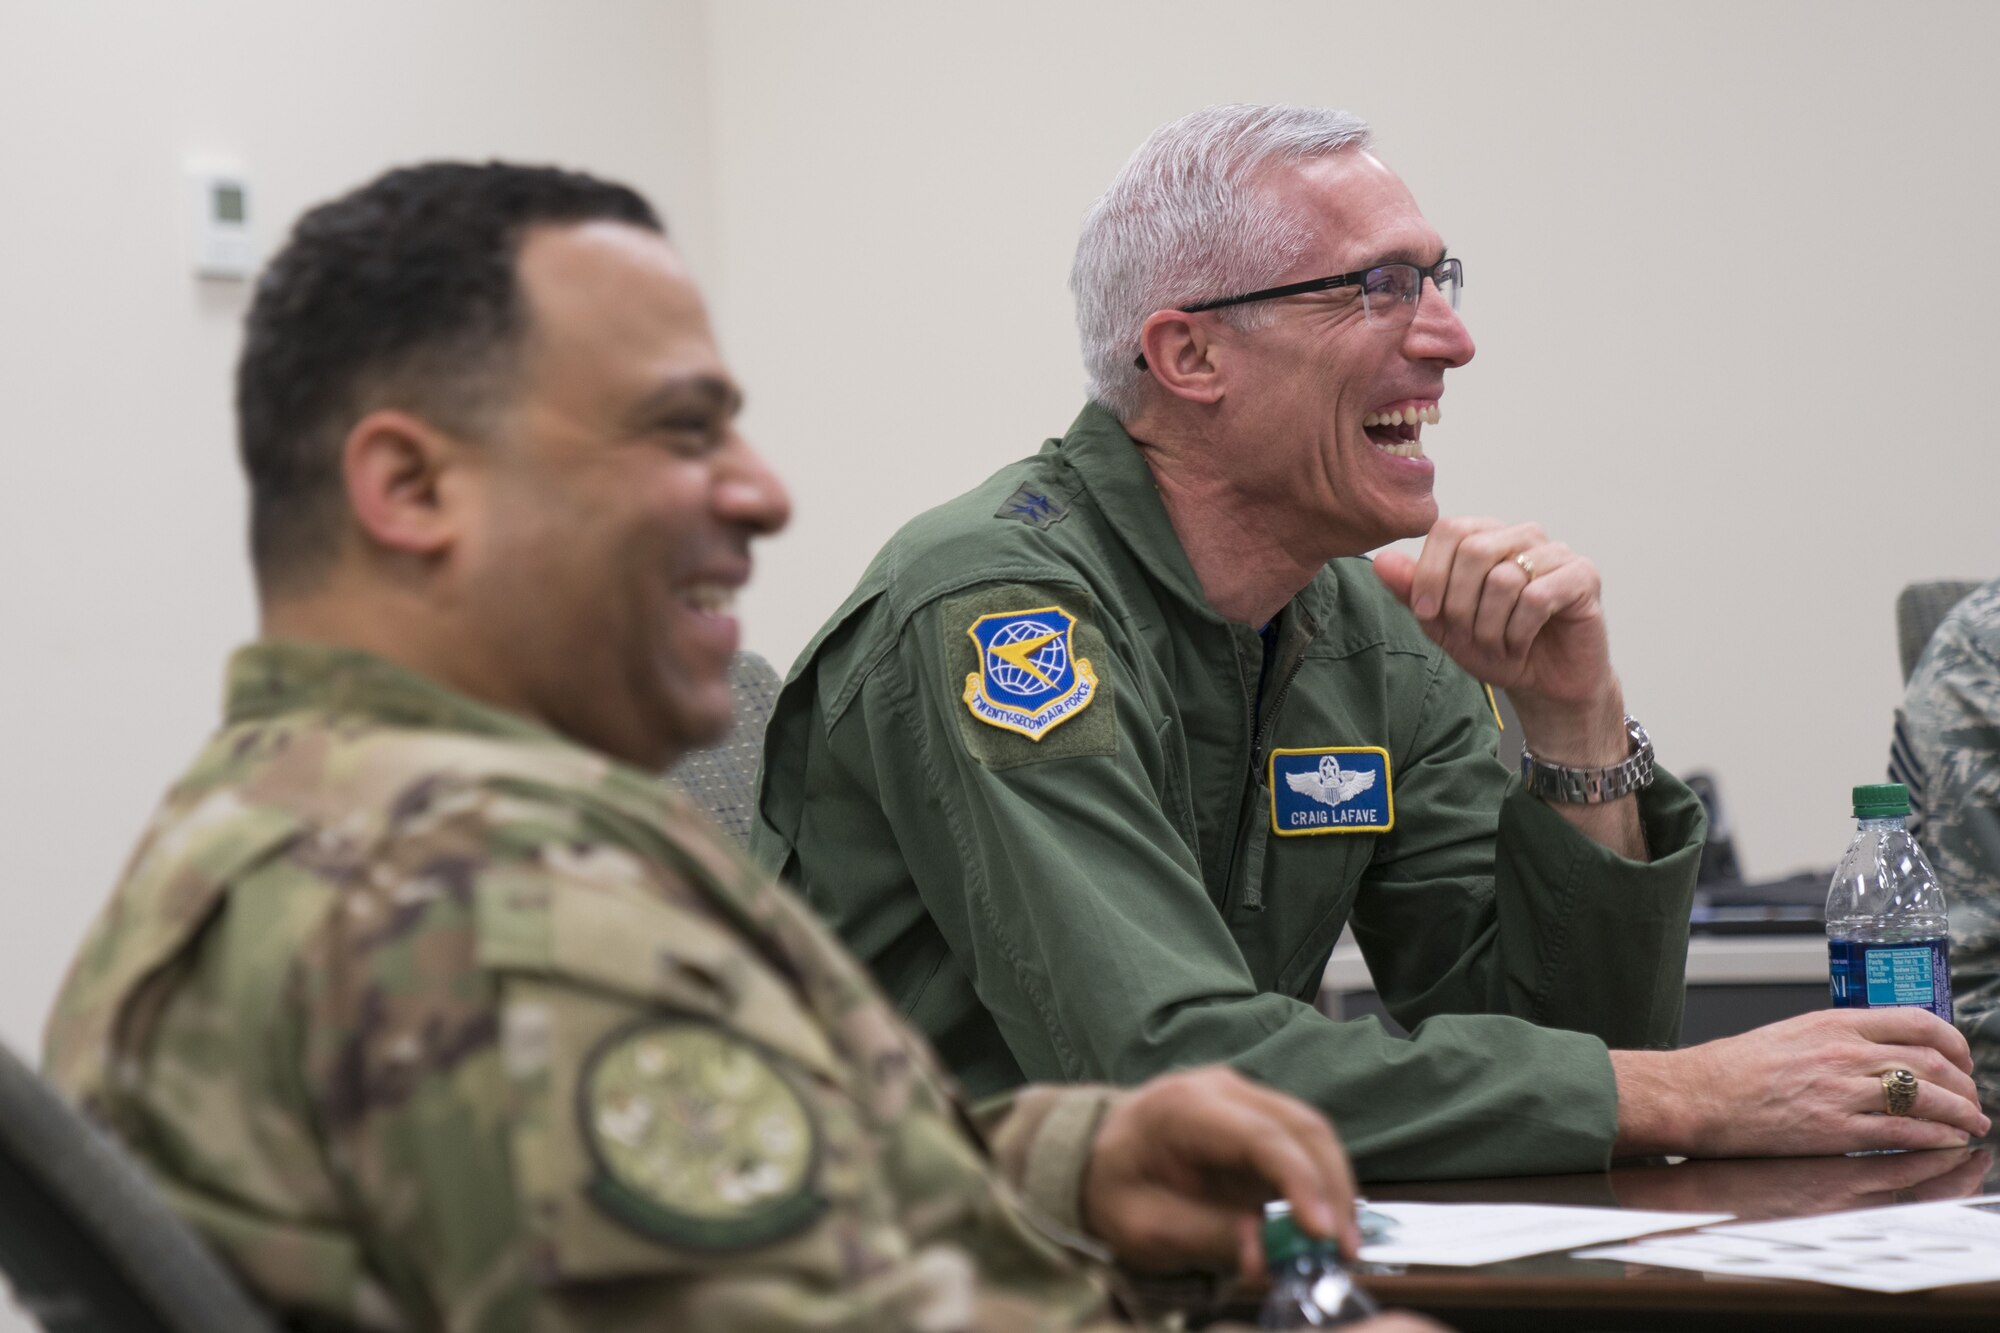 Maj. Gen. Craig La Fave, 22nd Air Force commander, shares a laugh with members of the 413th Flight Test Group during a unit visit Feb. 2, 2018, at Robins Air Force Base, Georgia. During his stay, La Fave got a first-hand look at the 413th FTG mission and discussed topics on various, current Air Force Reserve affairs. (U.S. Air Force photo by Jamal D. Sutter)